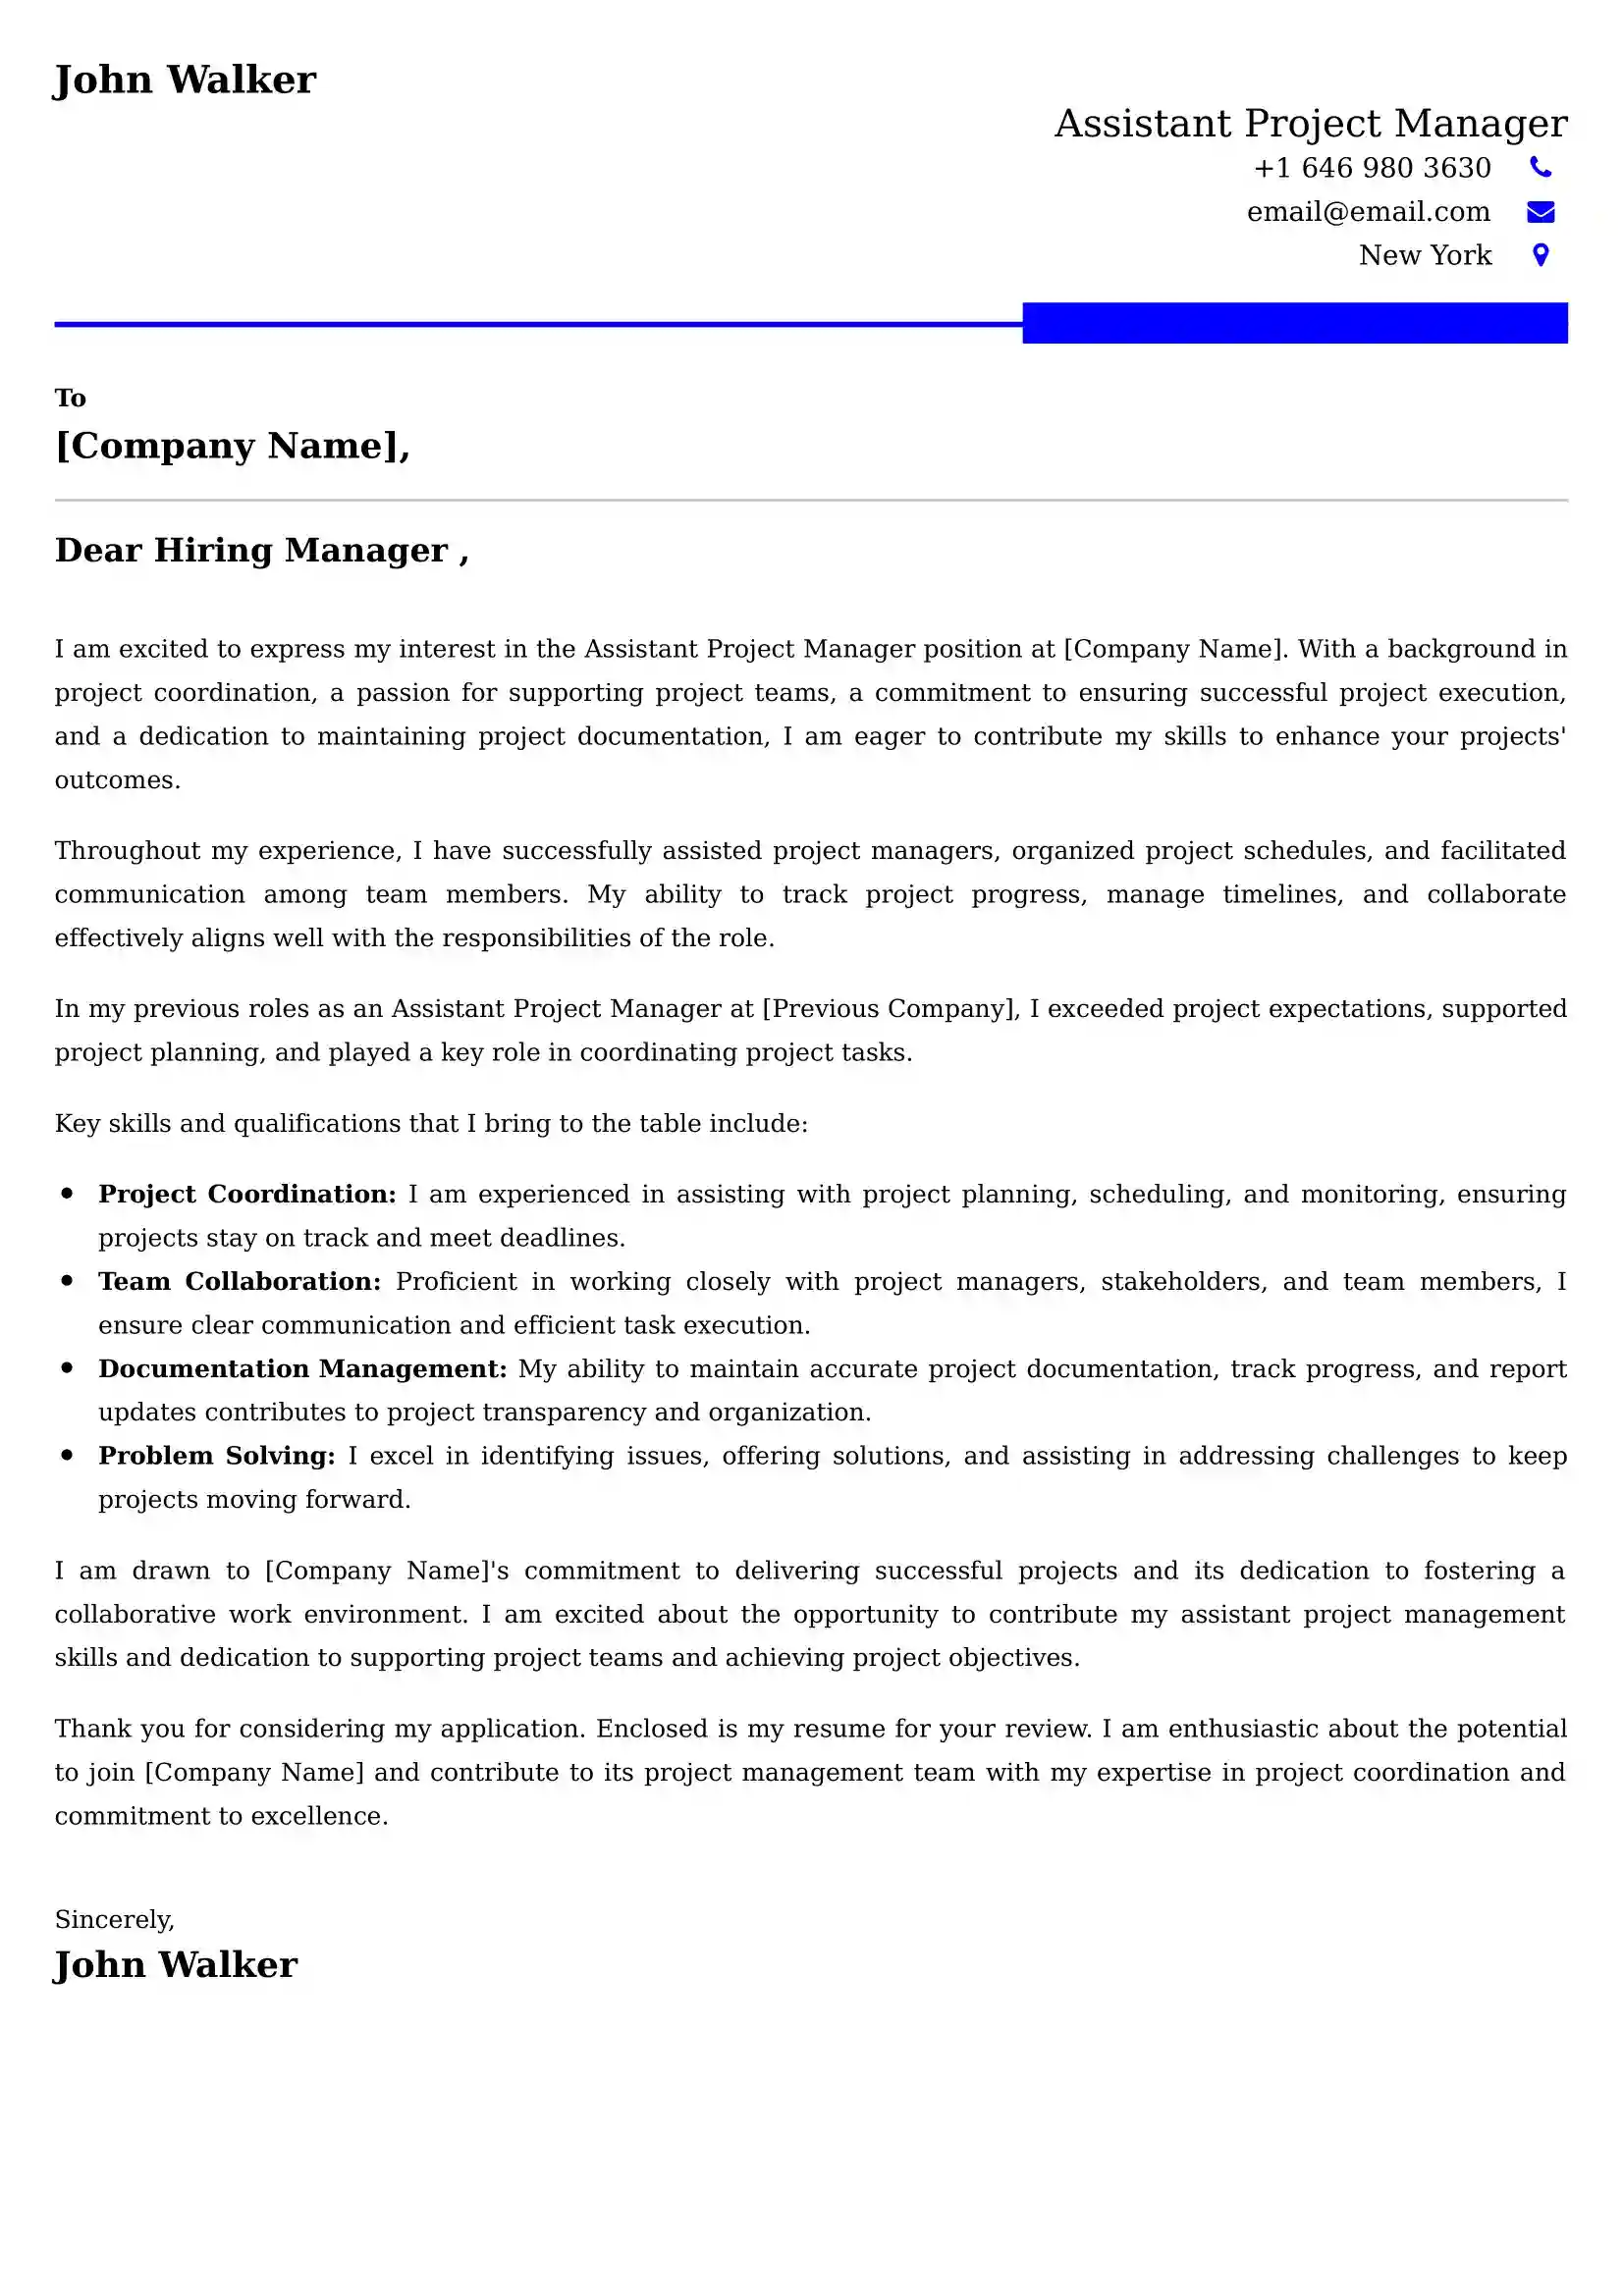 80+ Professional Information Technology Cover Letter Samples, Latest Format